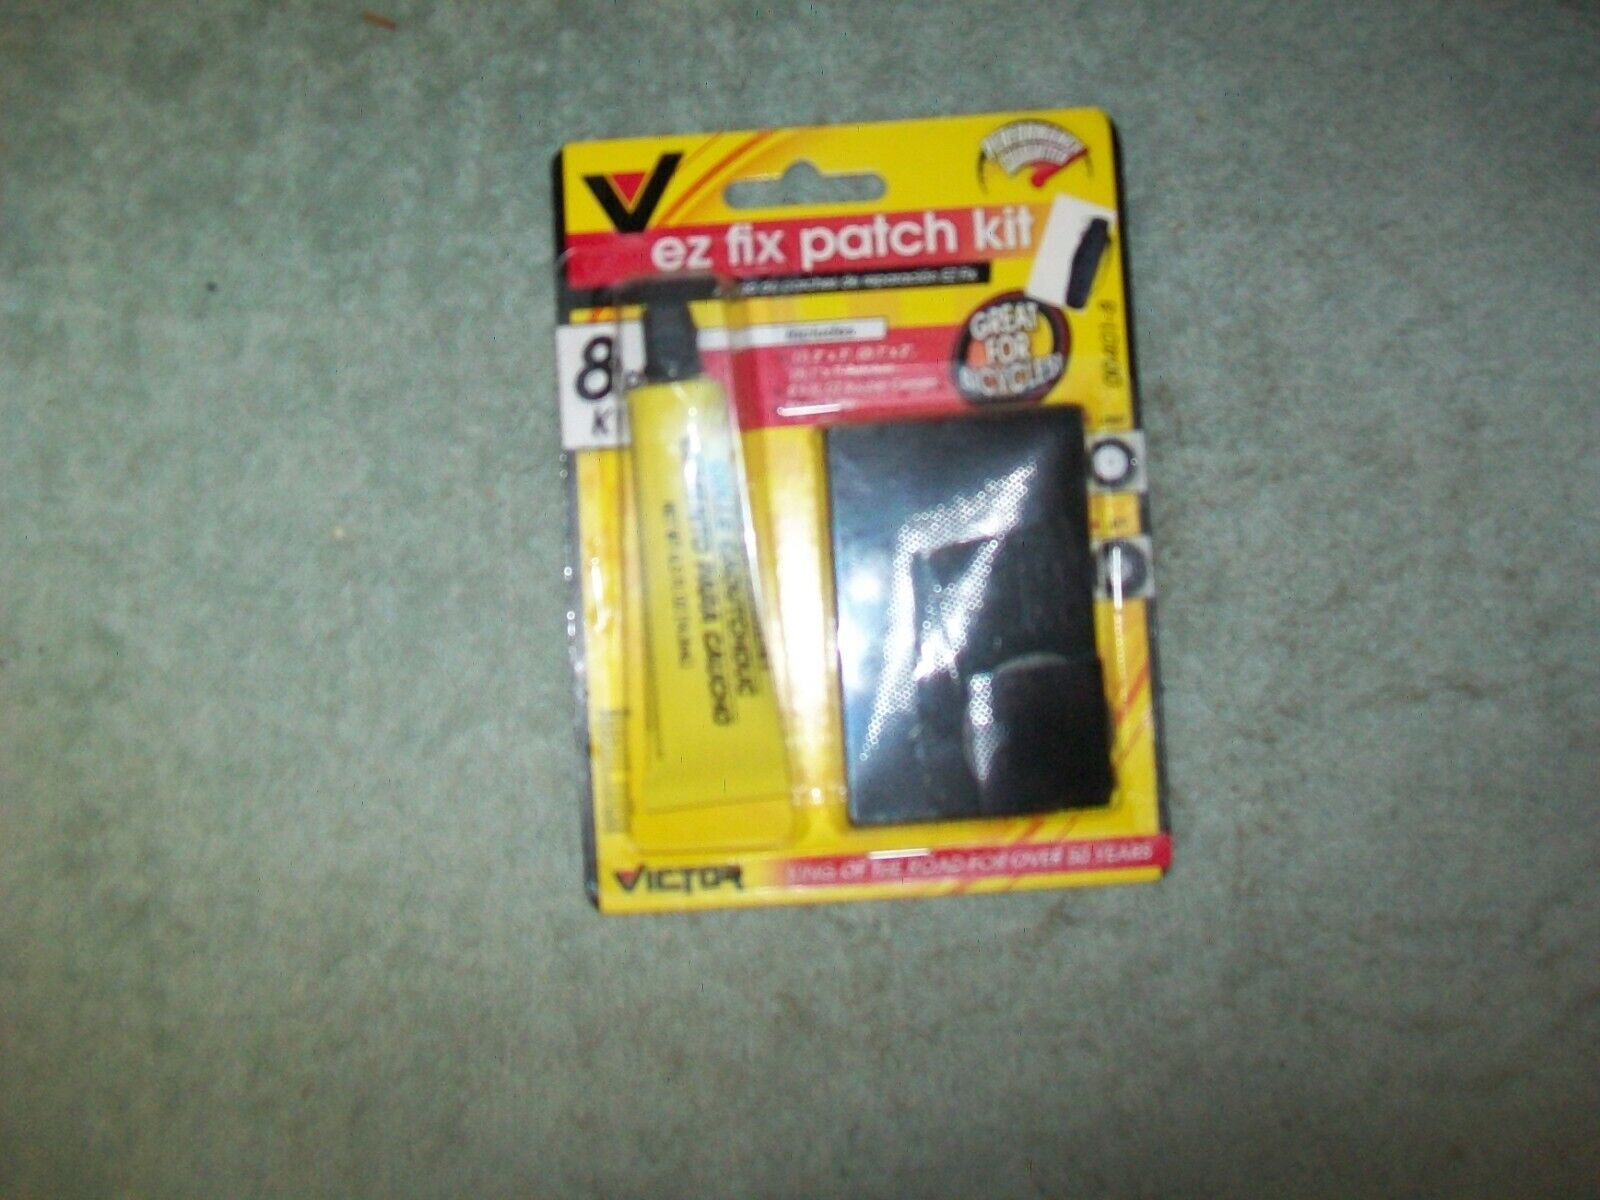 1 of Victor part # 00401-8 EZ fix tube patch kit great for bicycles